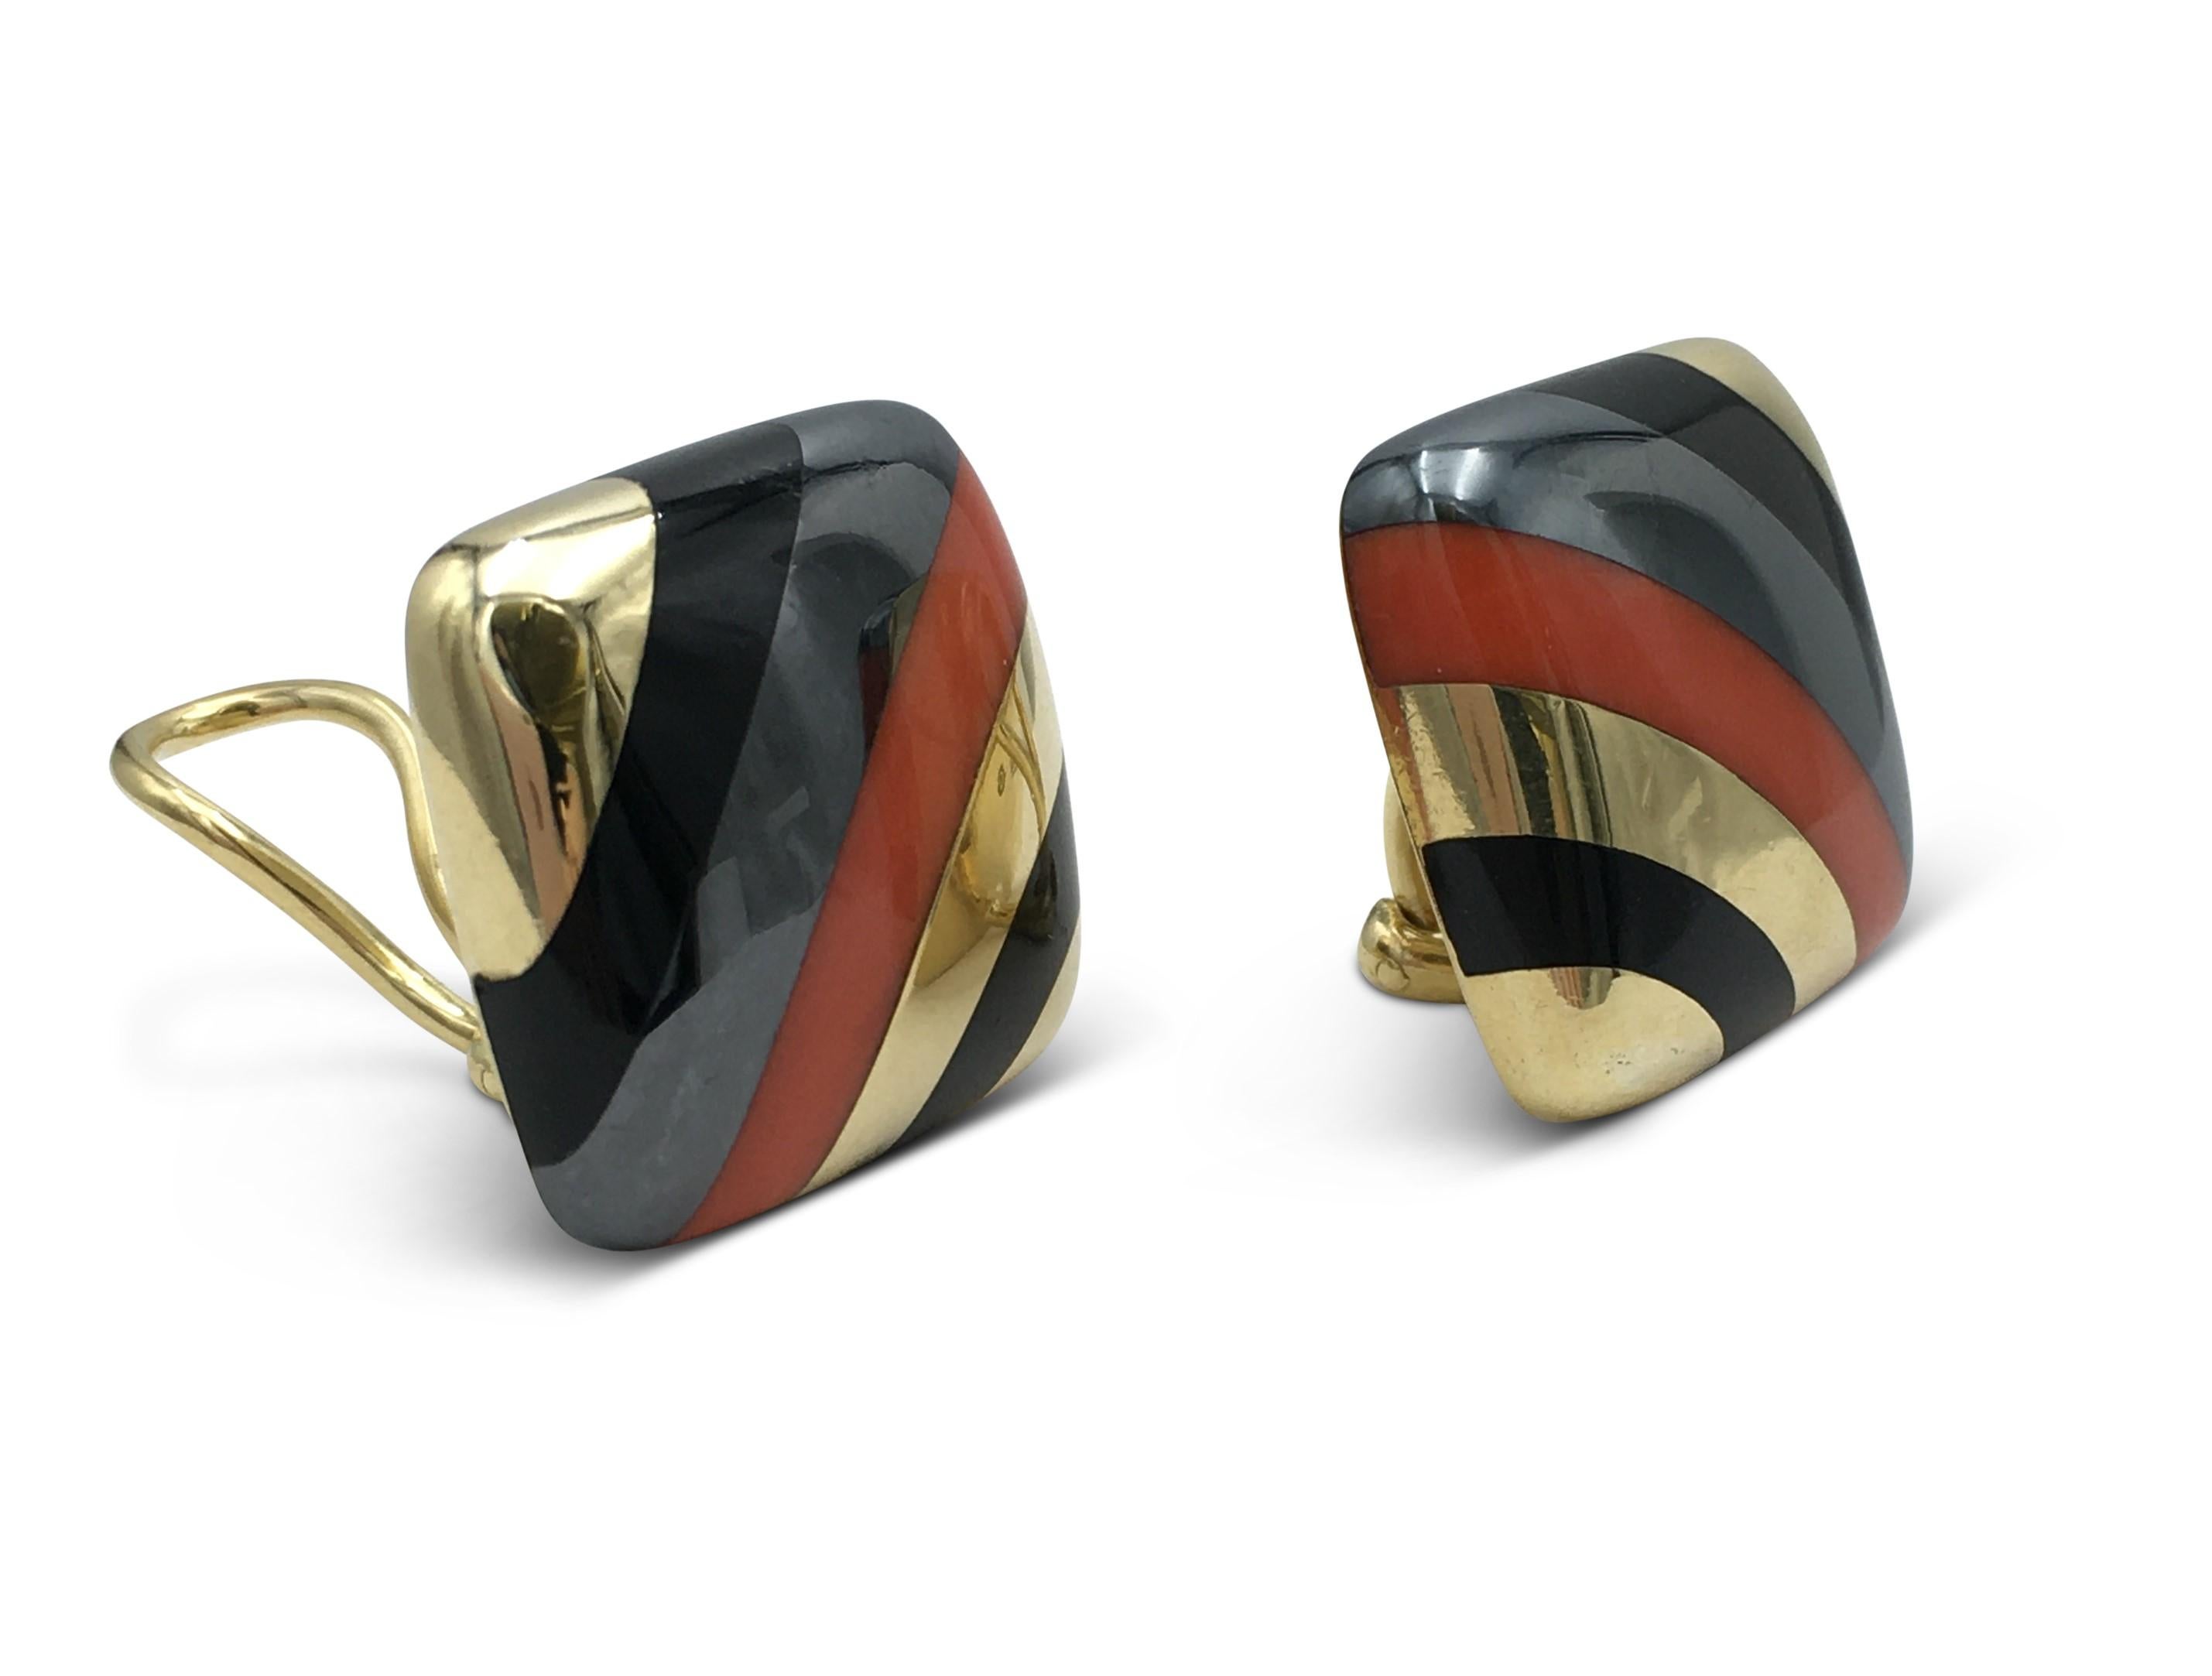 Authentic rare pair of earrings designed by Tiffany &Co. Crafted in 18 karat yellow gold, the earrings feature alternating inlaid bands of carved onyx hematite and coral stones. The earrings are clip-on with no posts. Signed T&Co, 18K, 1980. One